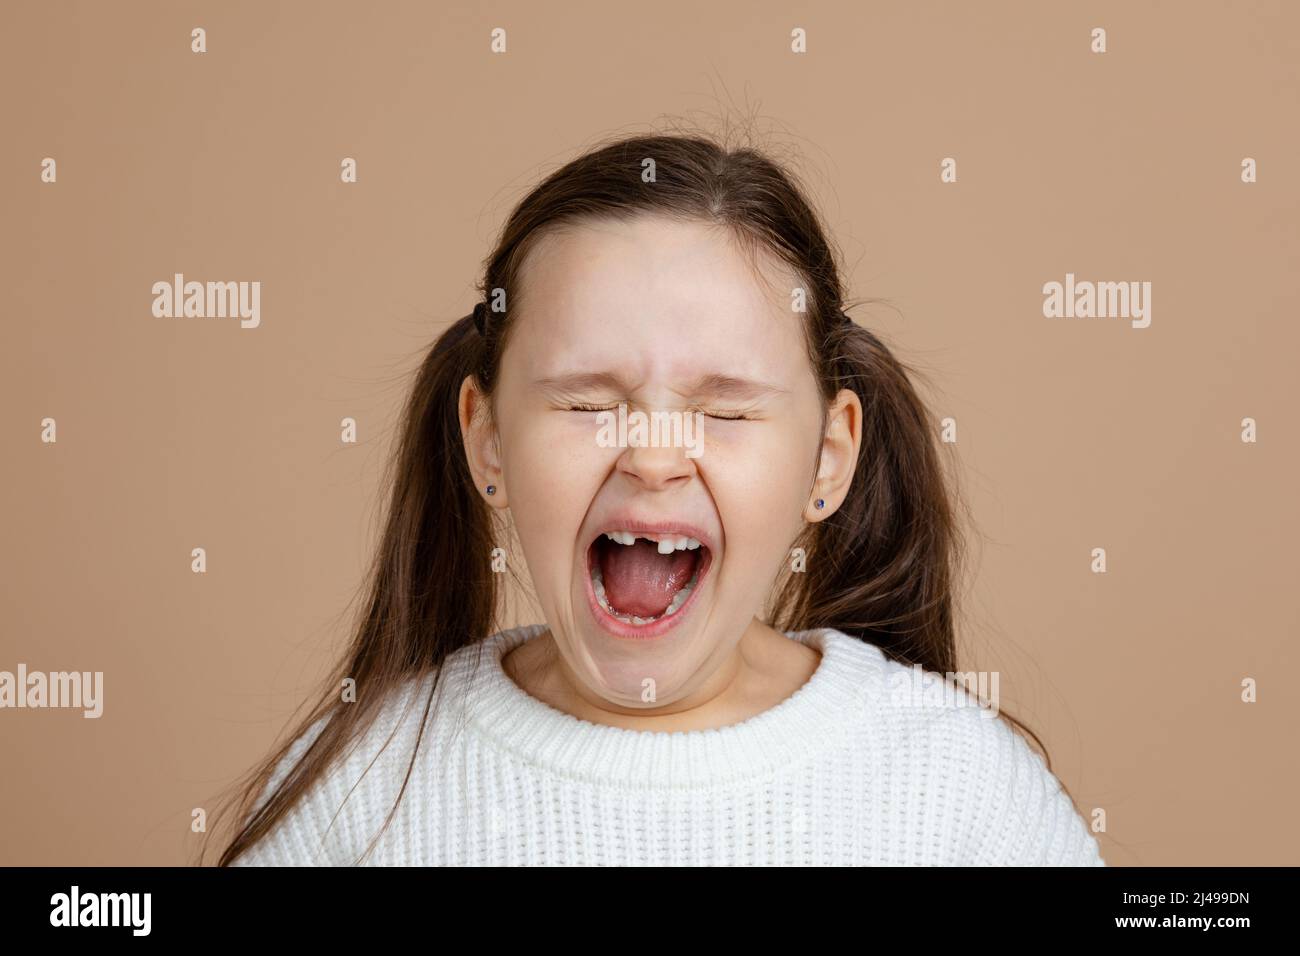 Portrait of young furious angry girl with long dark hair in pink, white sweater standing with closed eyes and open mouth, screaming, expressing malice Stock Photo